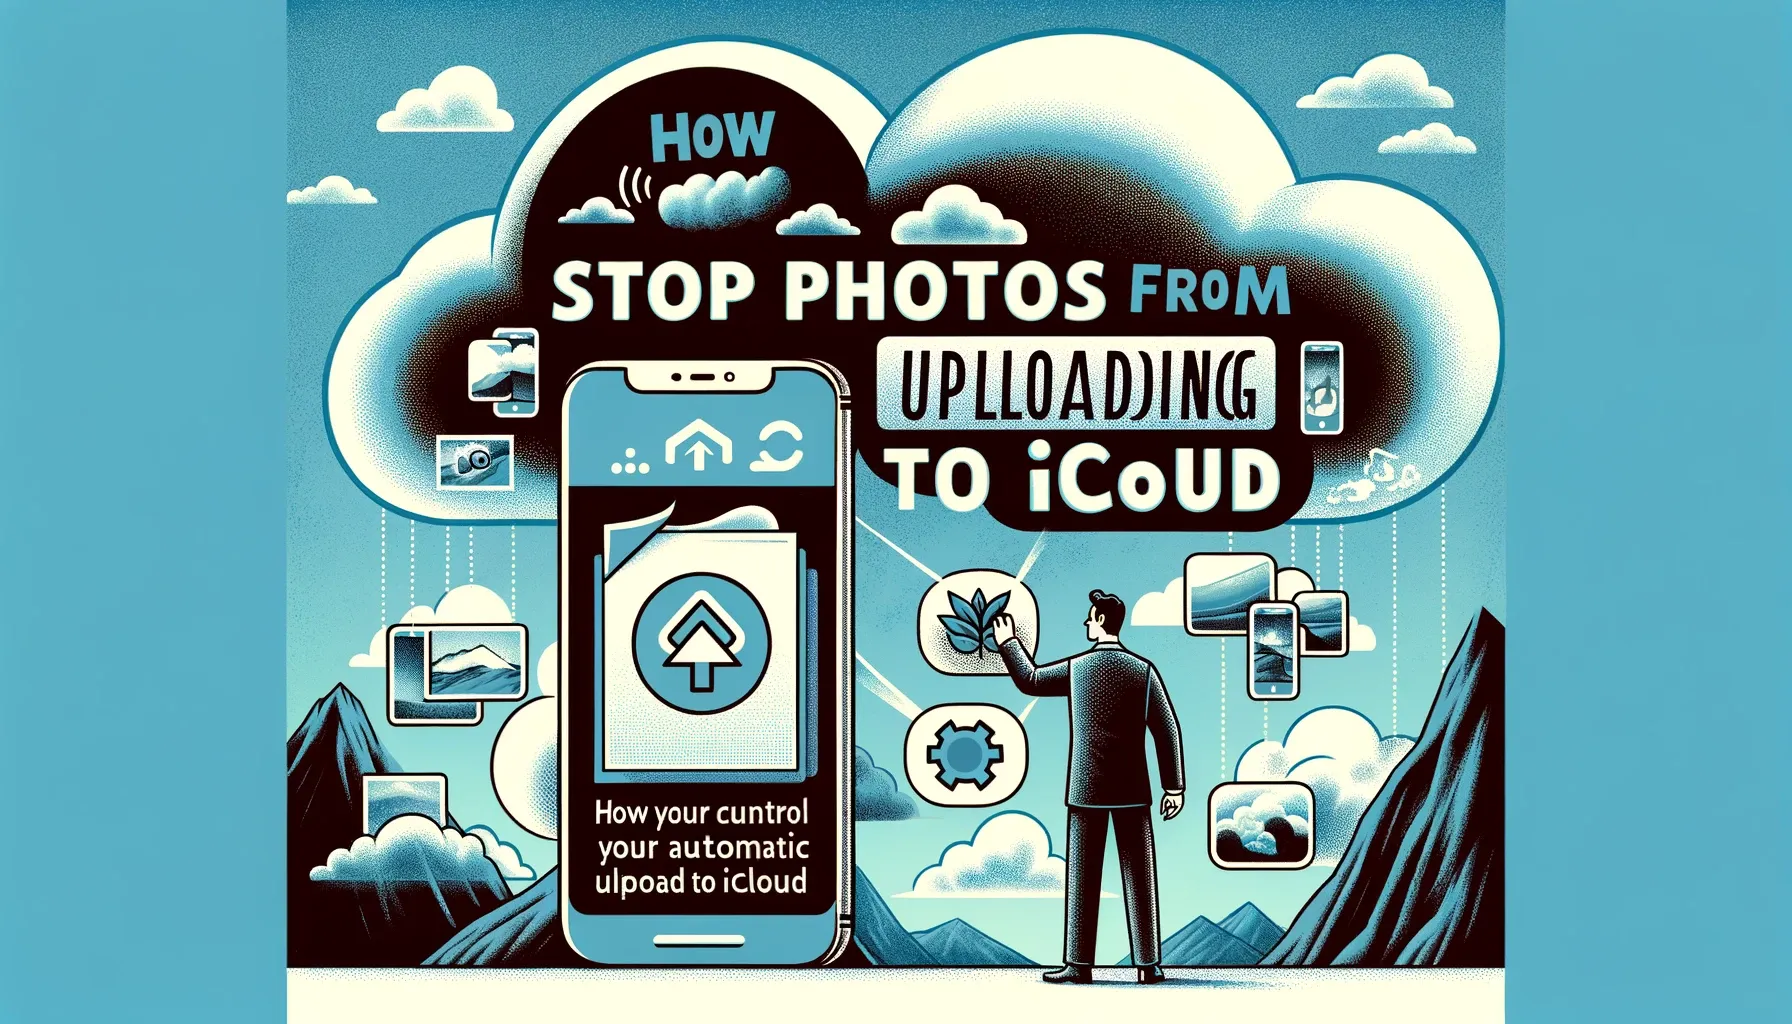 How to stop photos from uploading to iCloud?